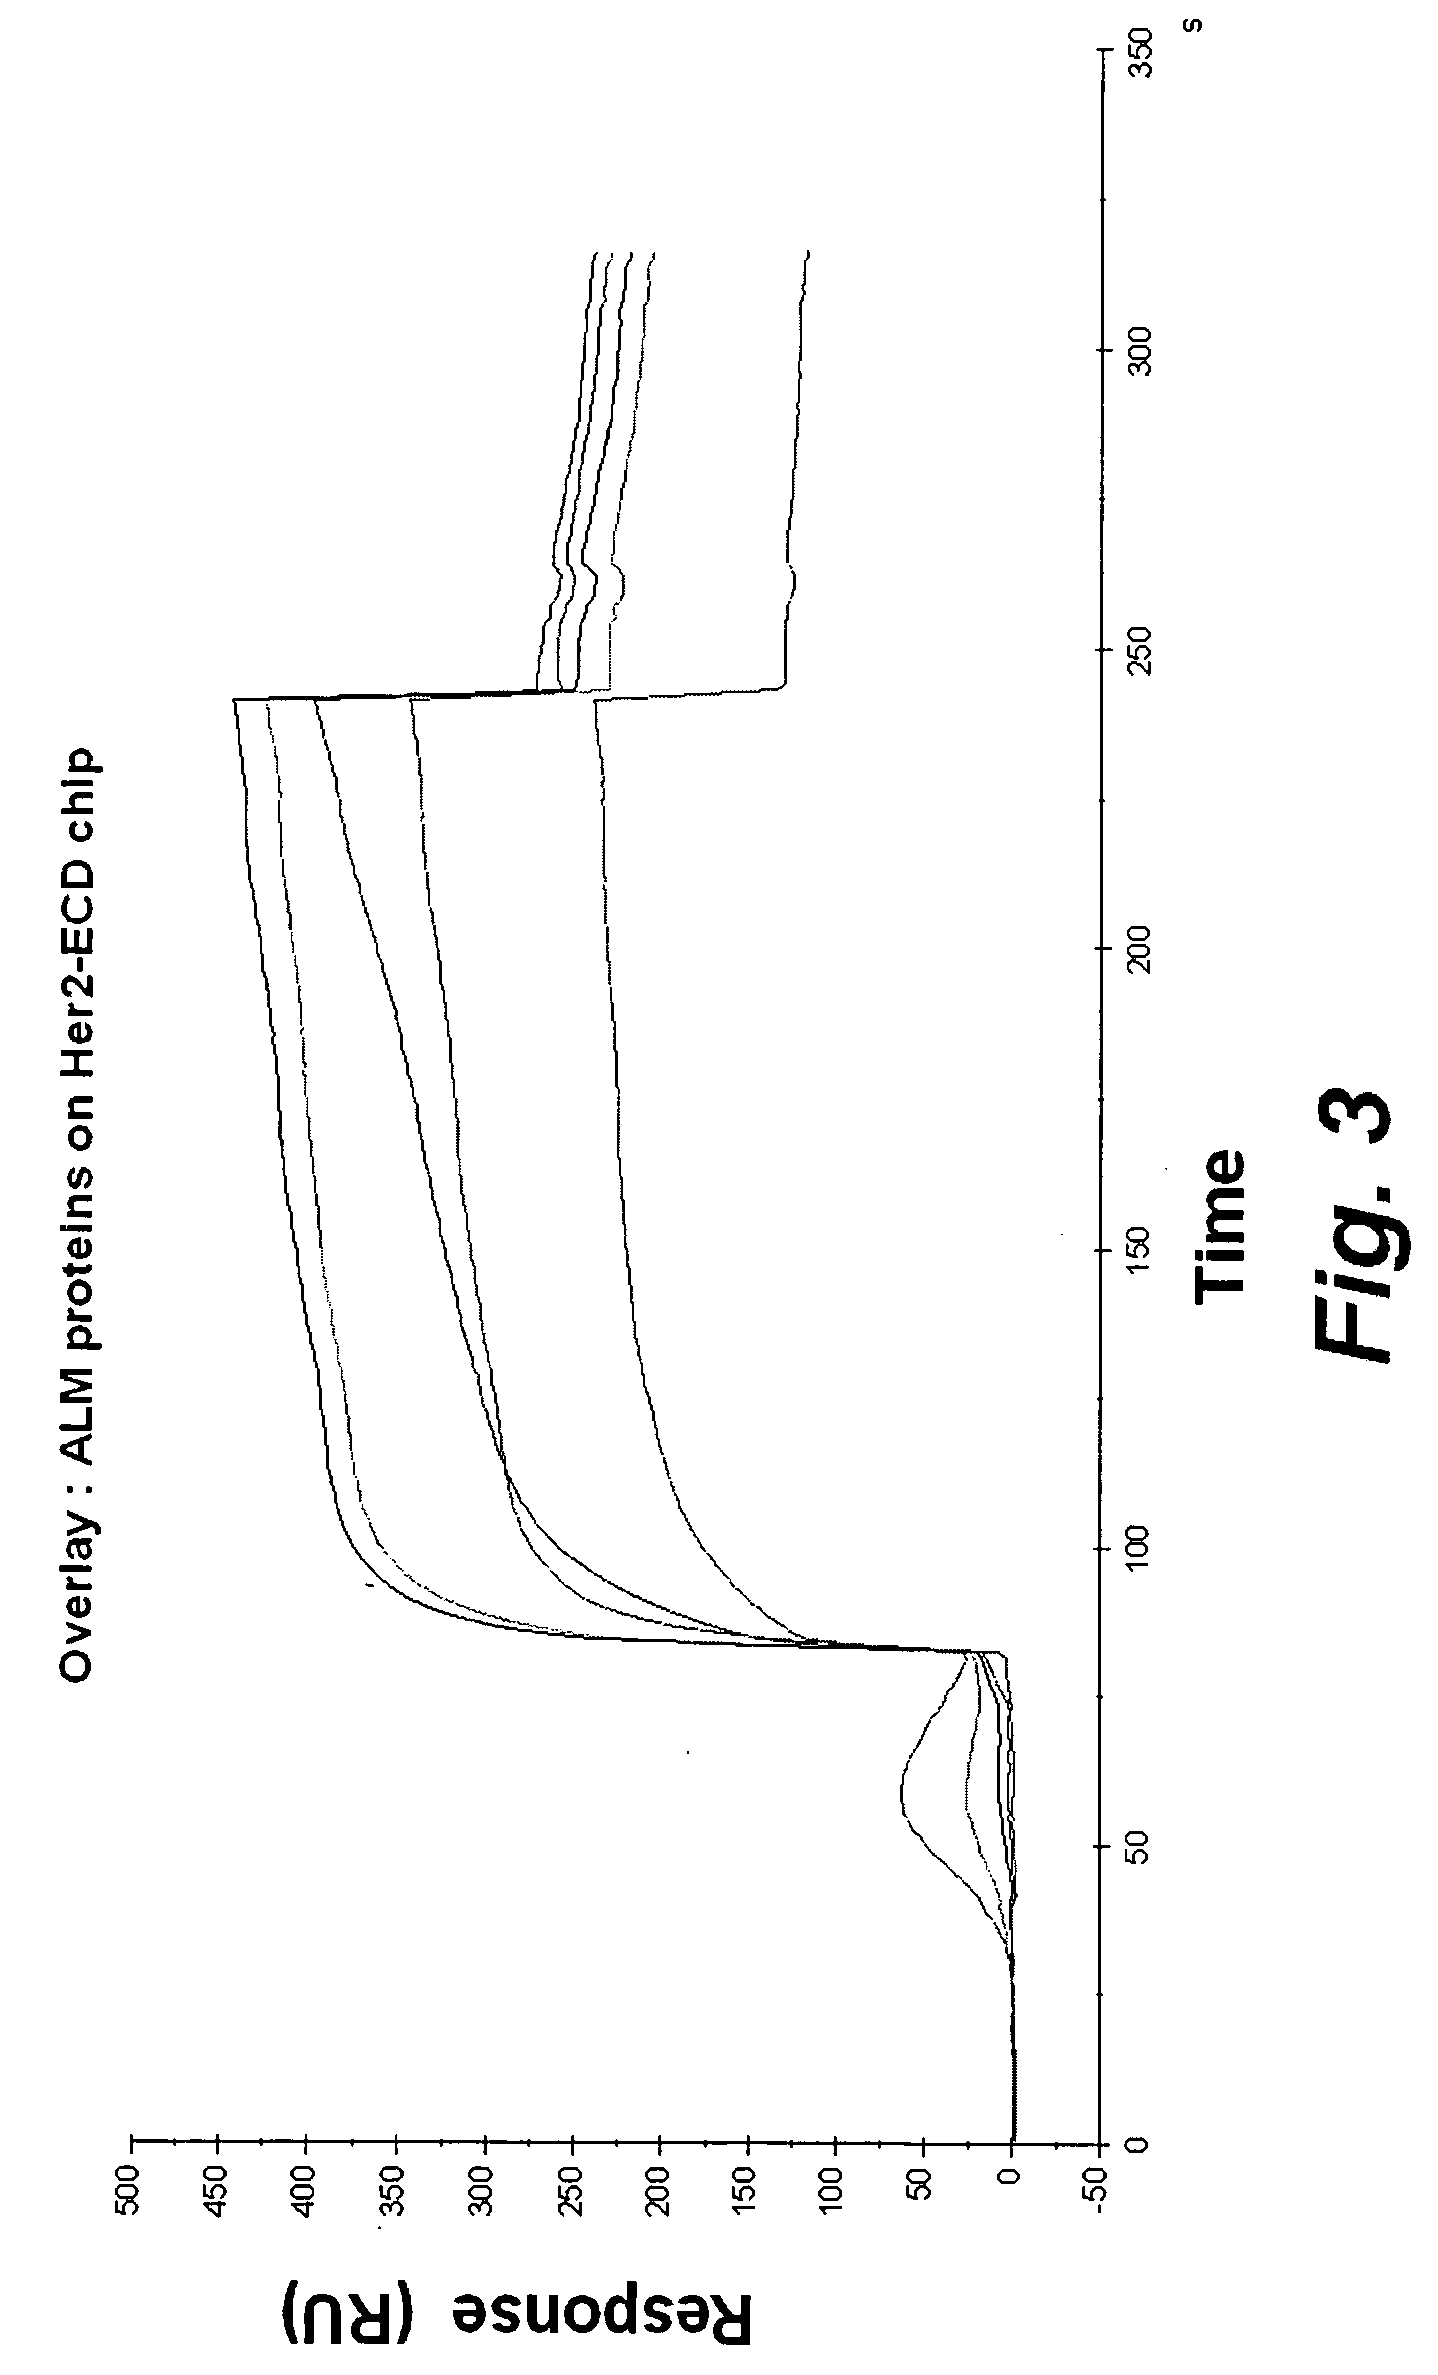 Bispecific single chain FV antibody molecules and methods of use thereof